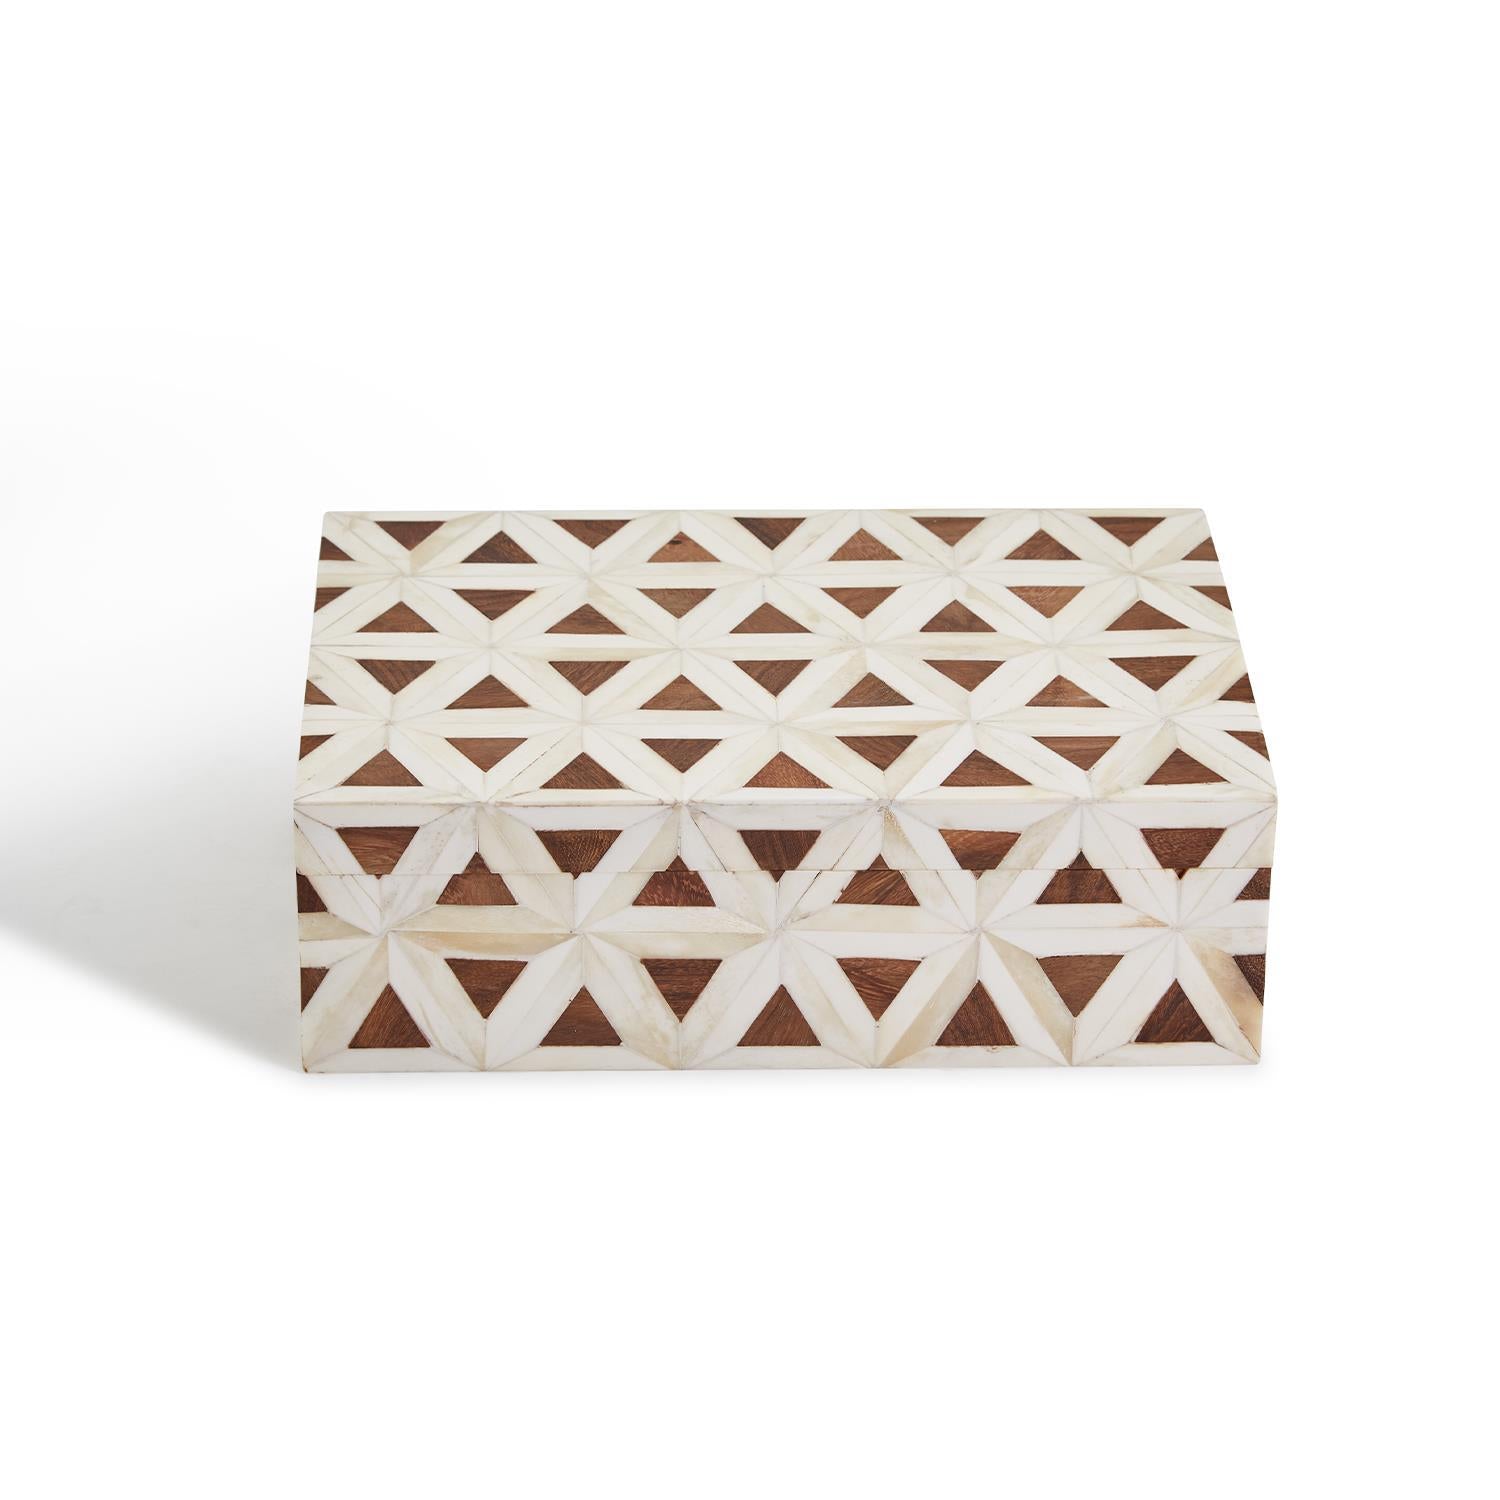 Two's Company Triangle Patterned Bone Covered Box